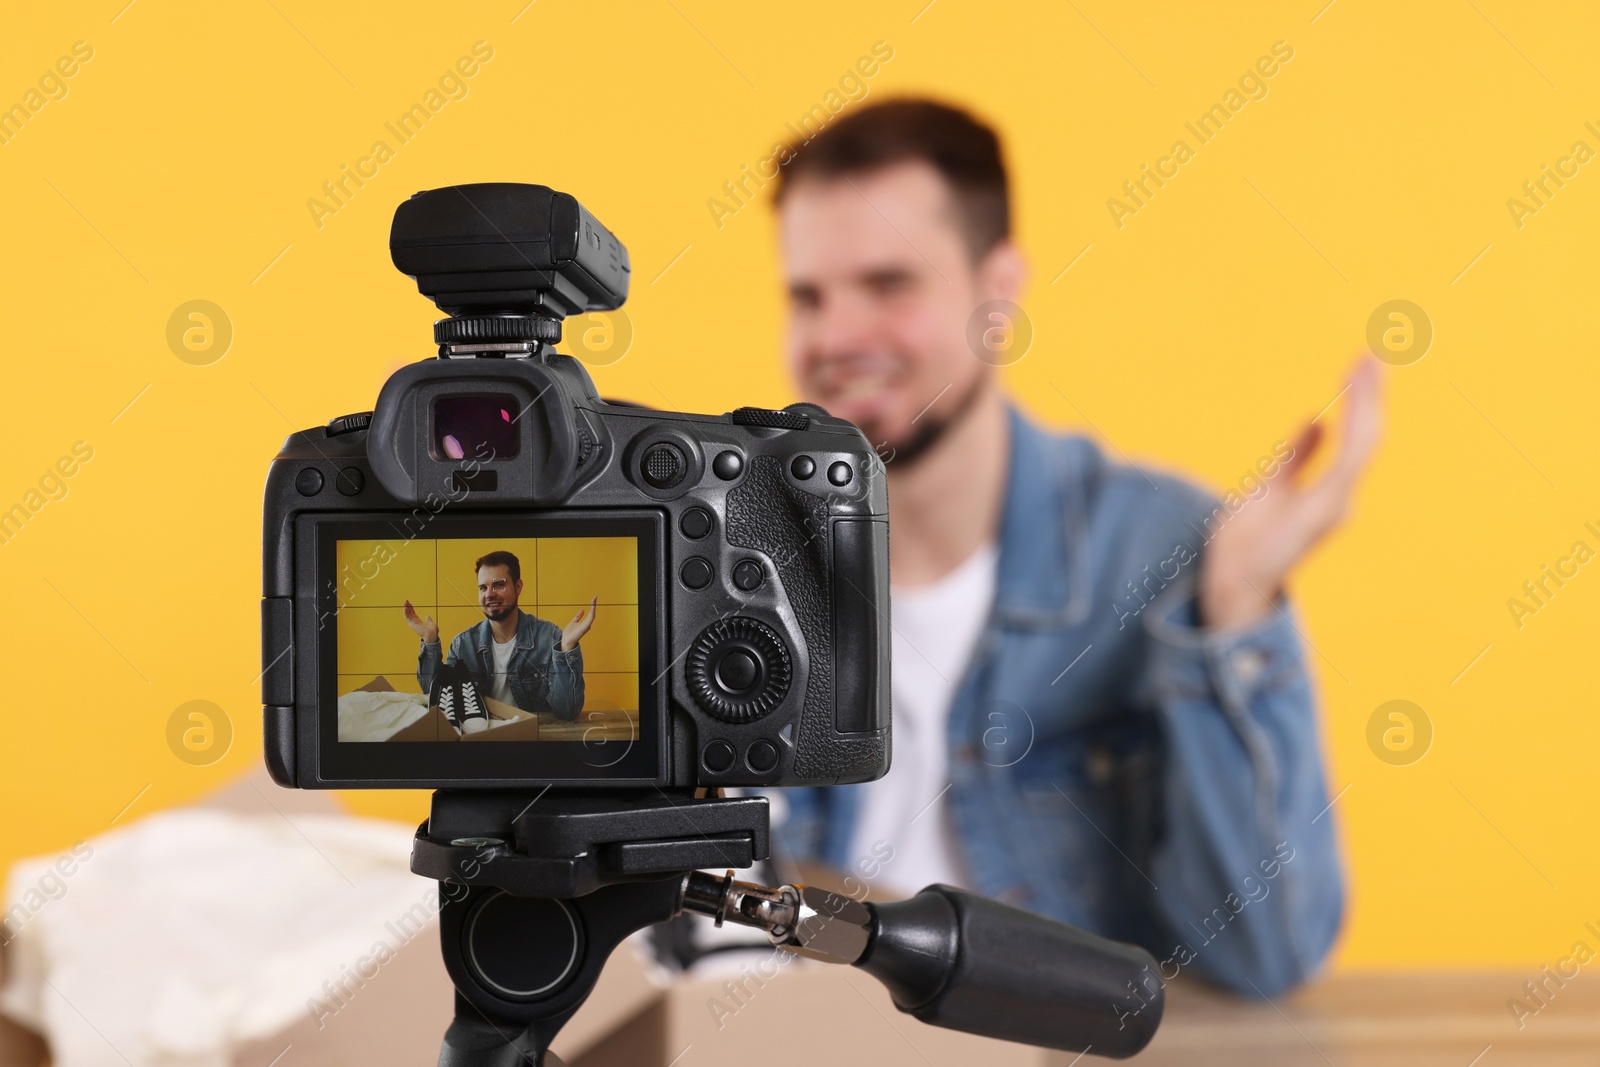 Photo of Fashion blogger showing sneakers while recording video at table against orange background, focus on camera